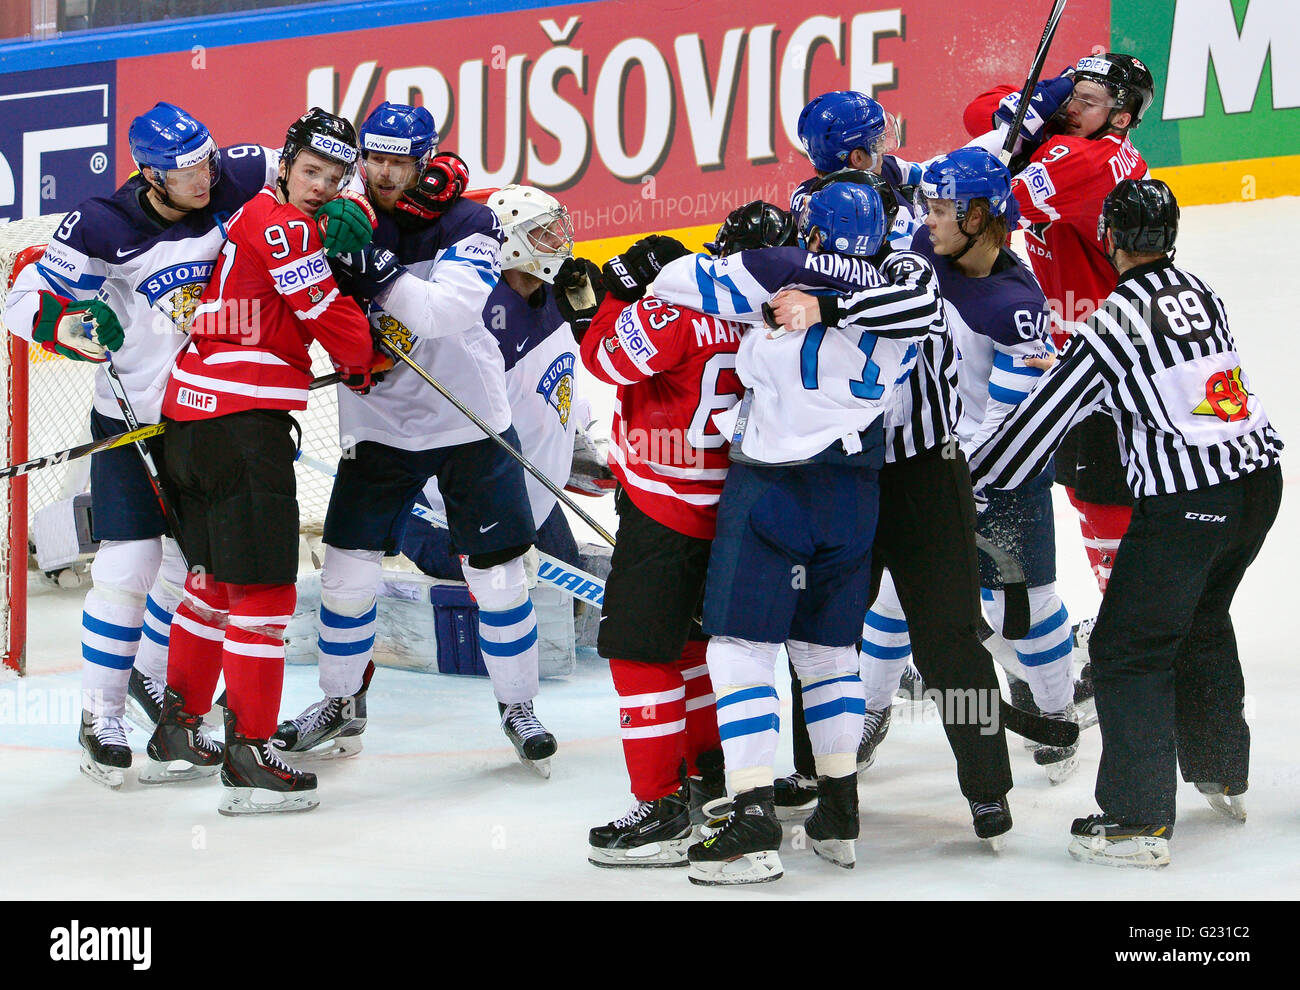 Moscow, Russia. 22nd May, 2016. Fight of hockey players of Canada and Finland during the Ice Hockey World Championships final match between Finland and Canada, in Moscow, Russia, on Sunday, May 22, 2016. Credit:  Roman Vondrous/CTK Photo/Alamy Live News Stock Photo